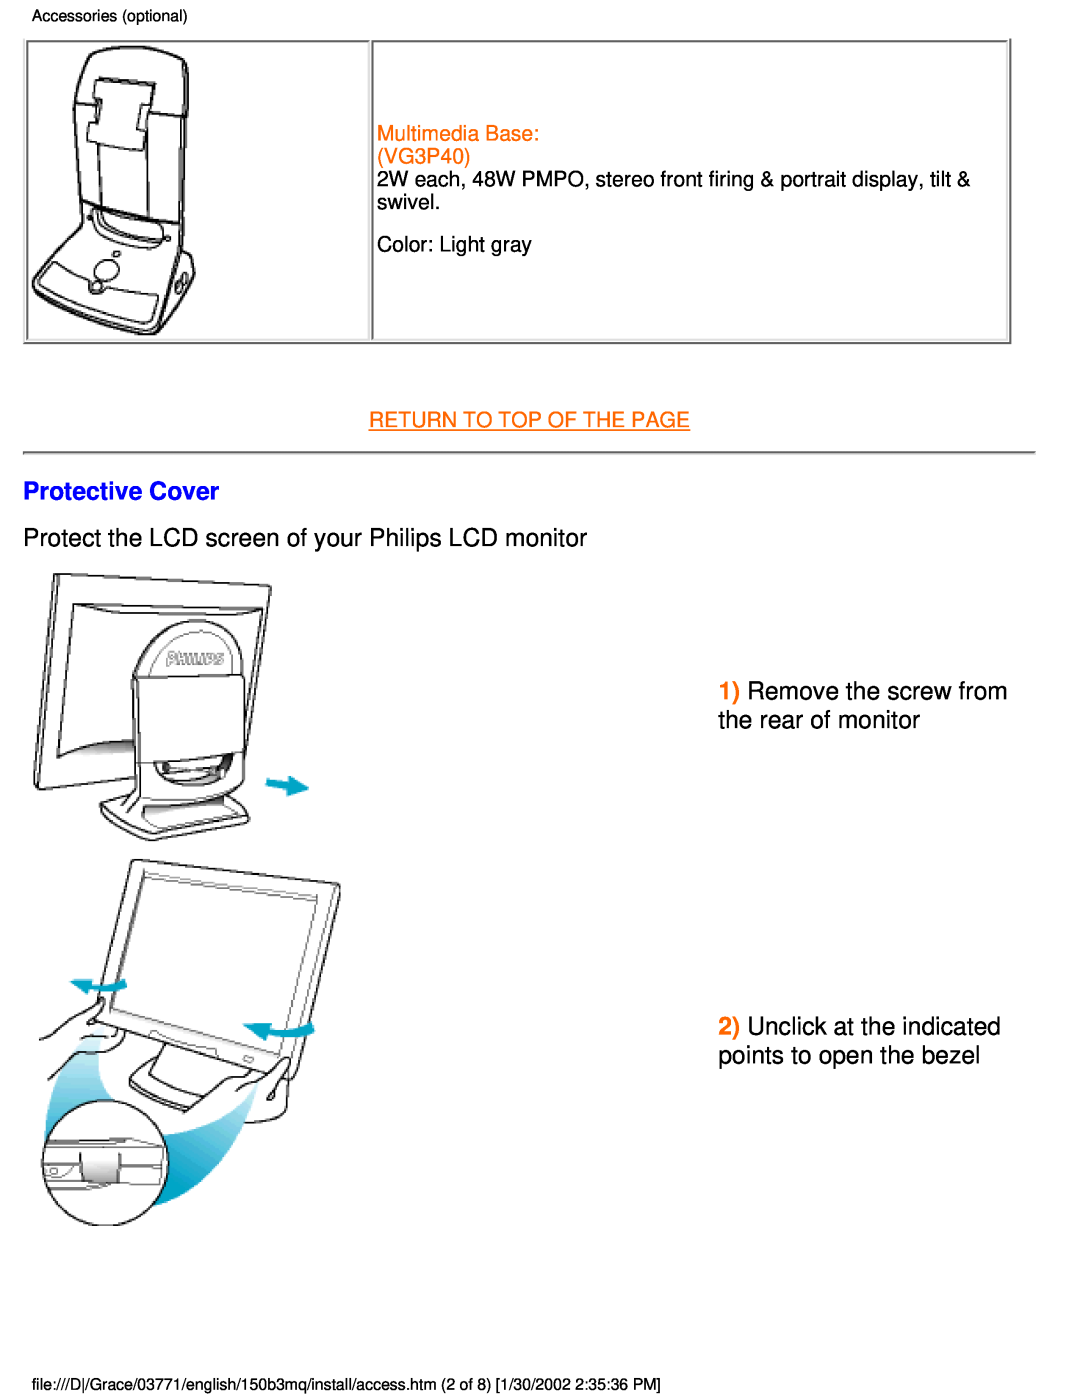 Philips 150B3M/150B3Q user manual Protective Cover, Remove the screw from the rear of monitor, Multimedia Base VG3P40 